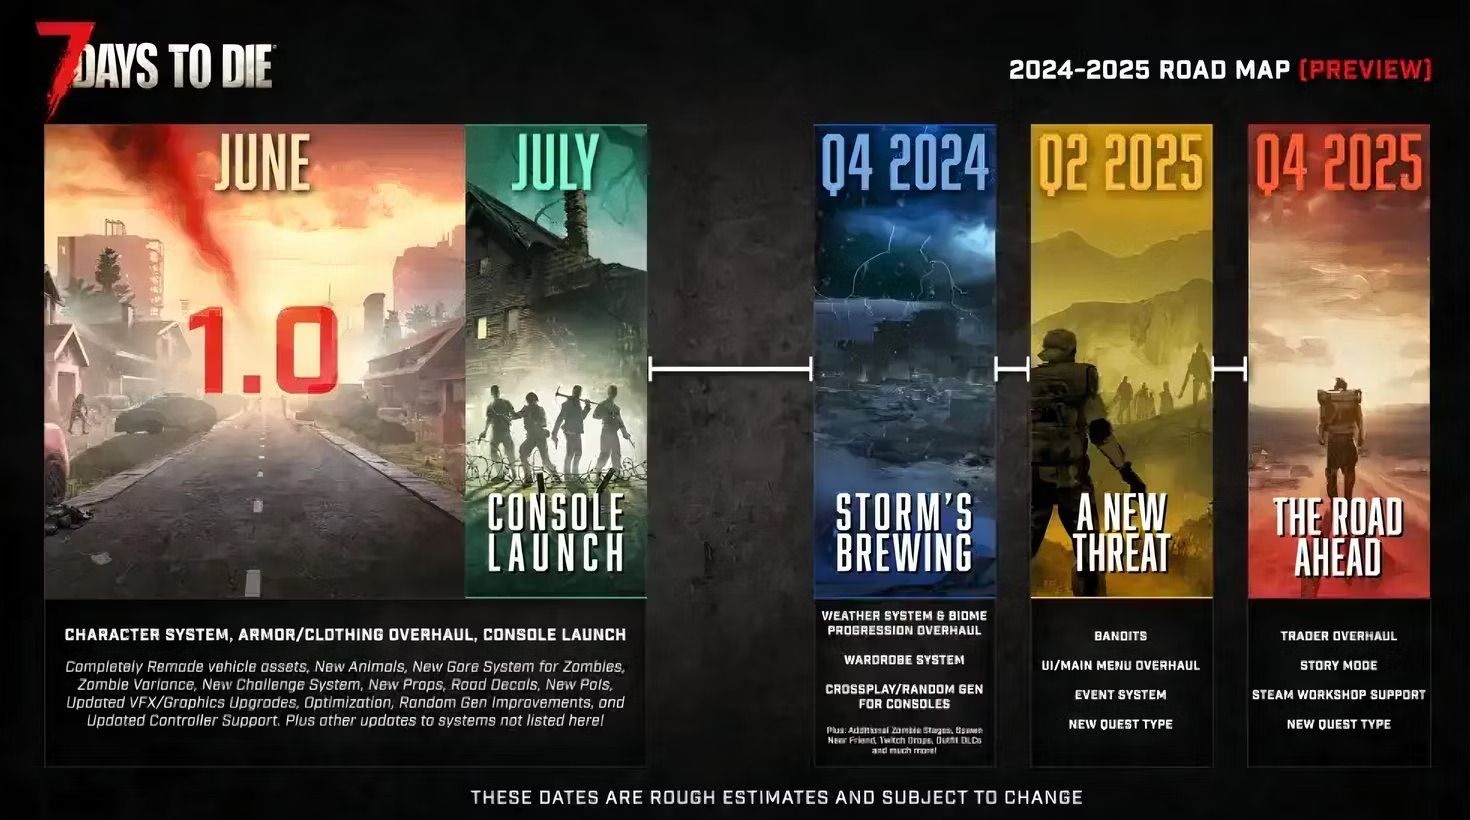 7-days-to-die-1-0-full-release-2024-2025-content-updates-roadmap-pc-console.jpg